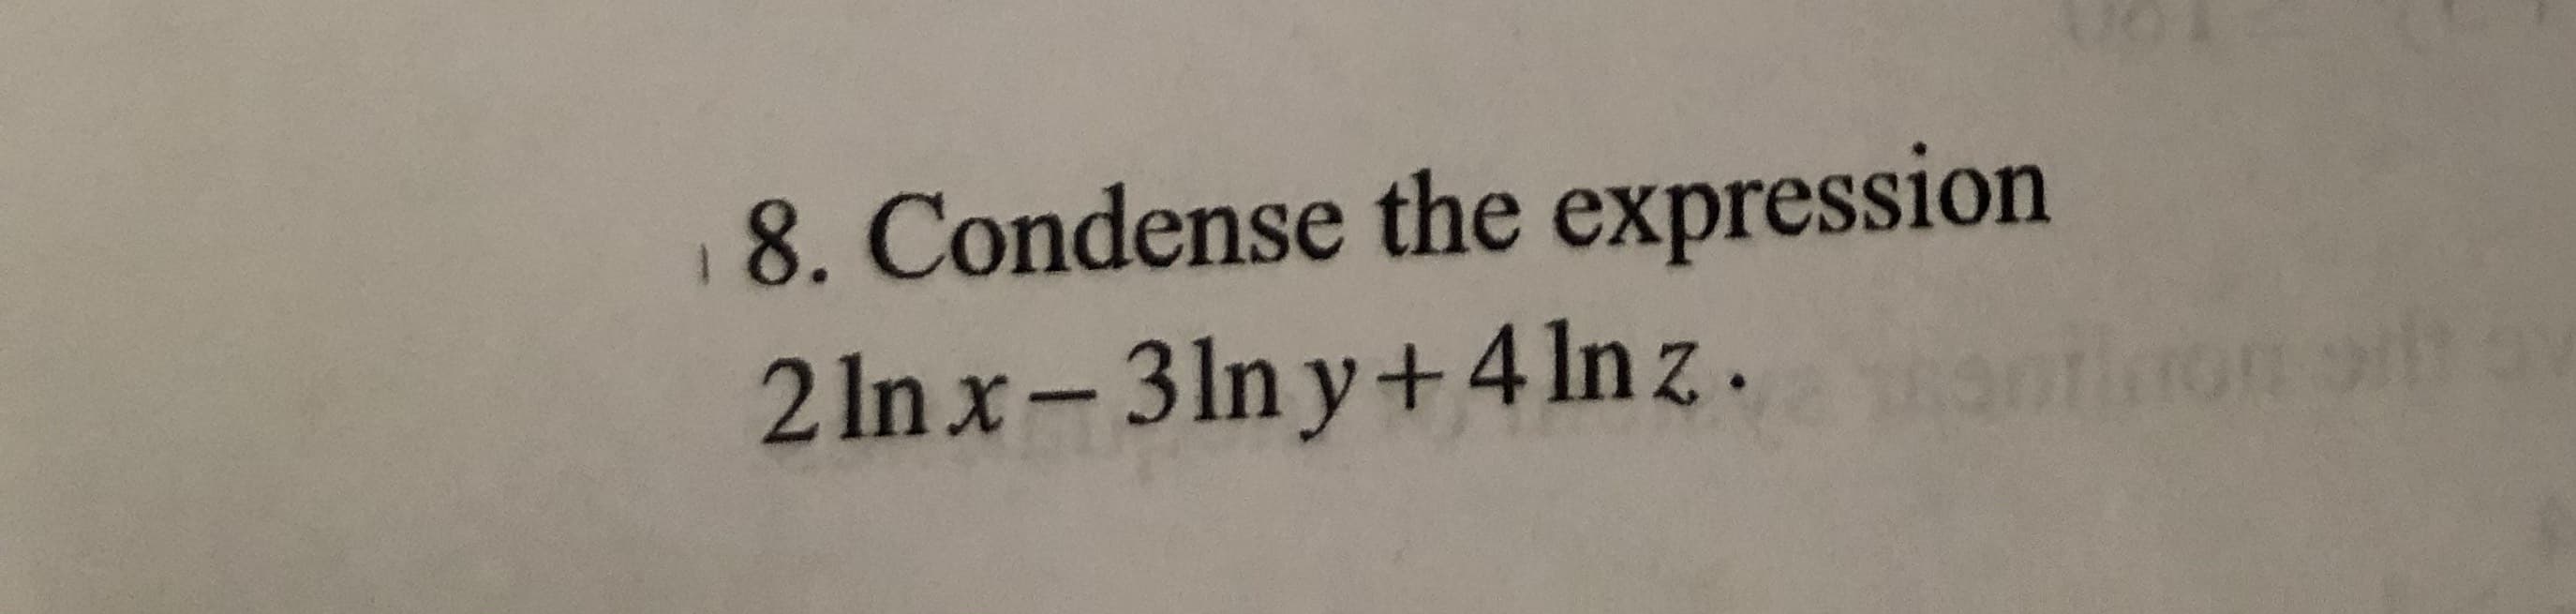 8. Condense the expression
2 In x-3ln y+4 In z.
